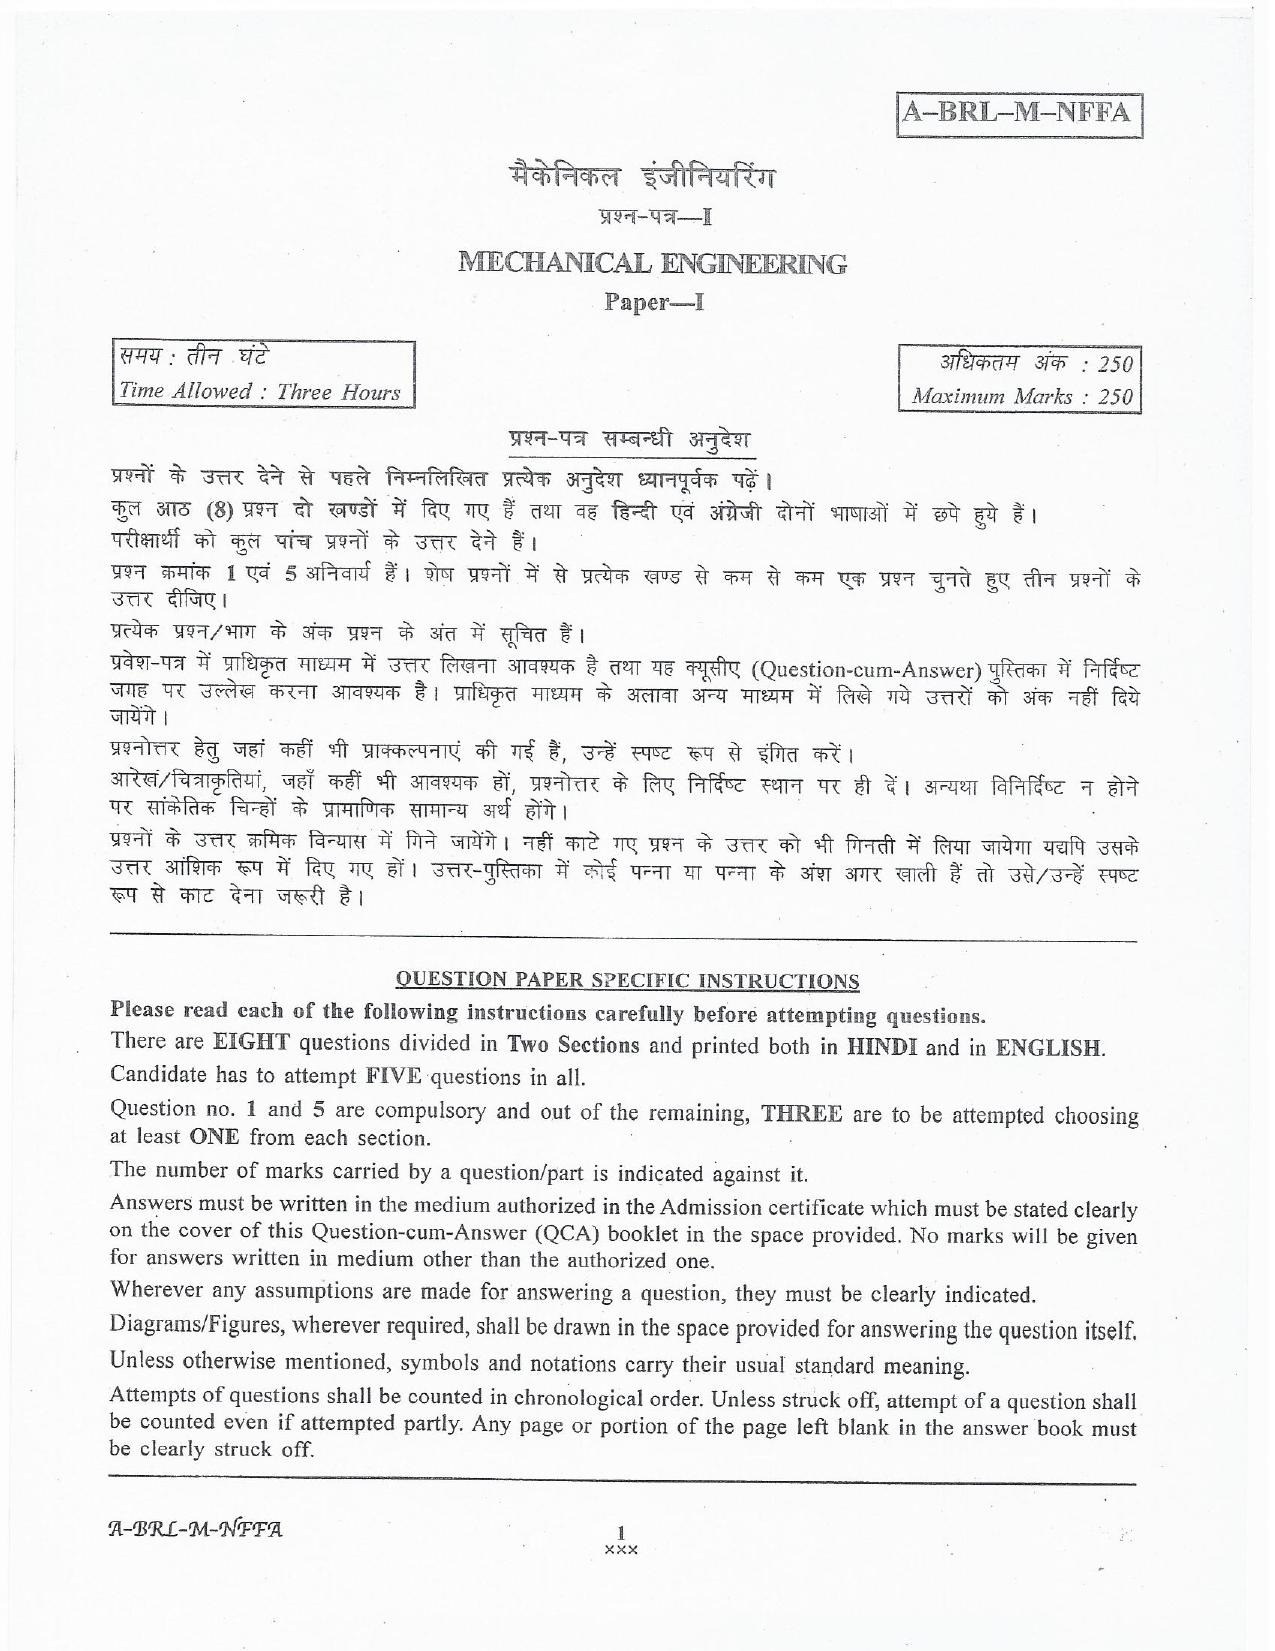 lakshadweep.gov.in Mechanical Engineering Question Papers - Page 1